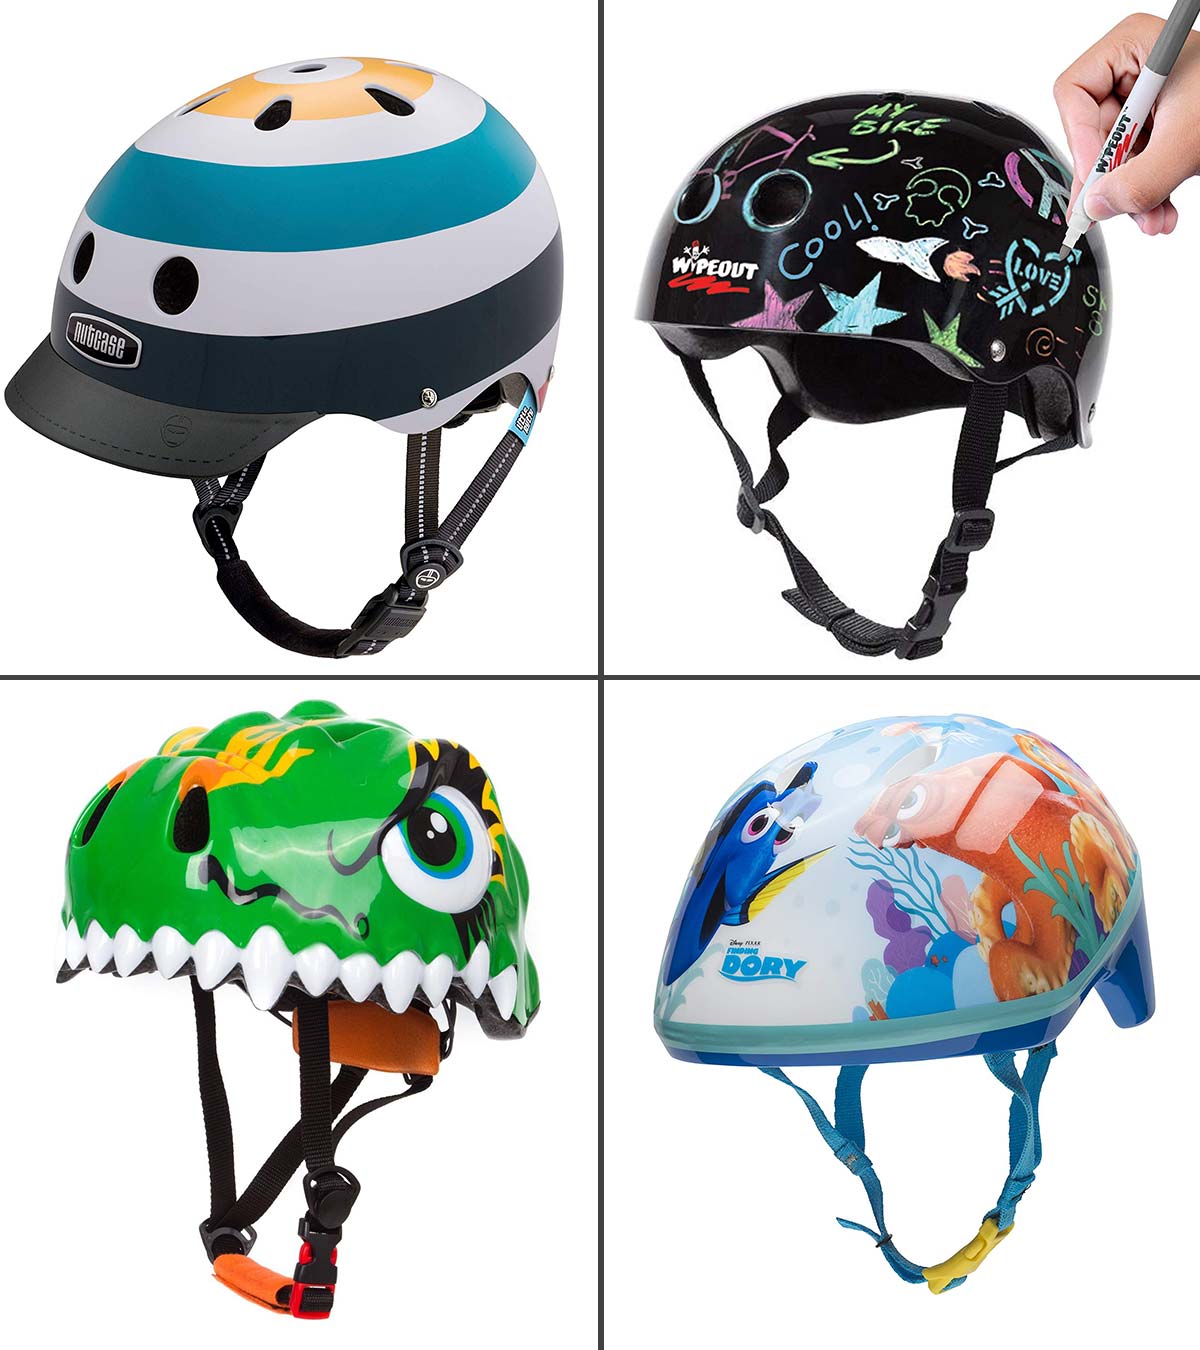 15 Best Bike Helmets For Kids in - Ages 3 to 12 Years in 2021